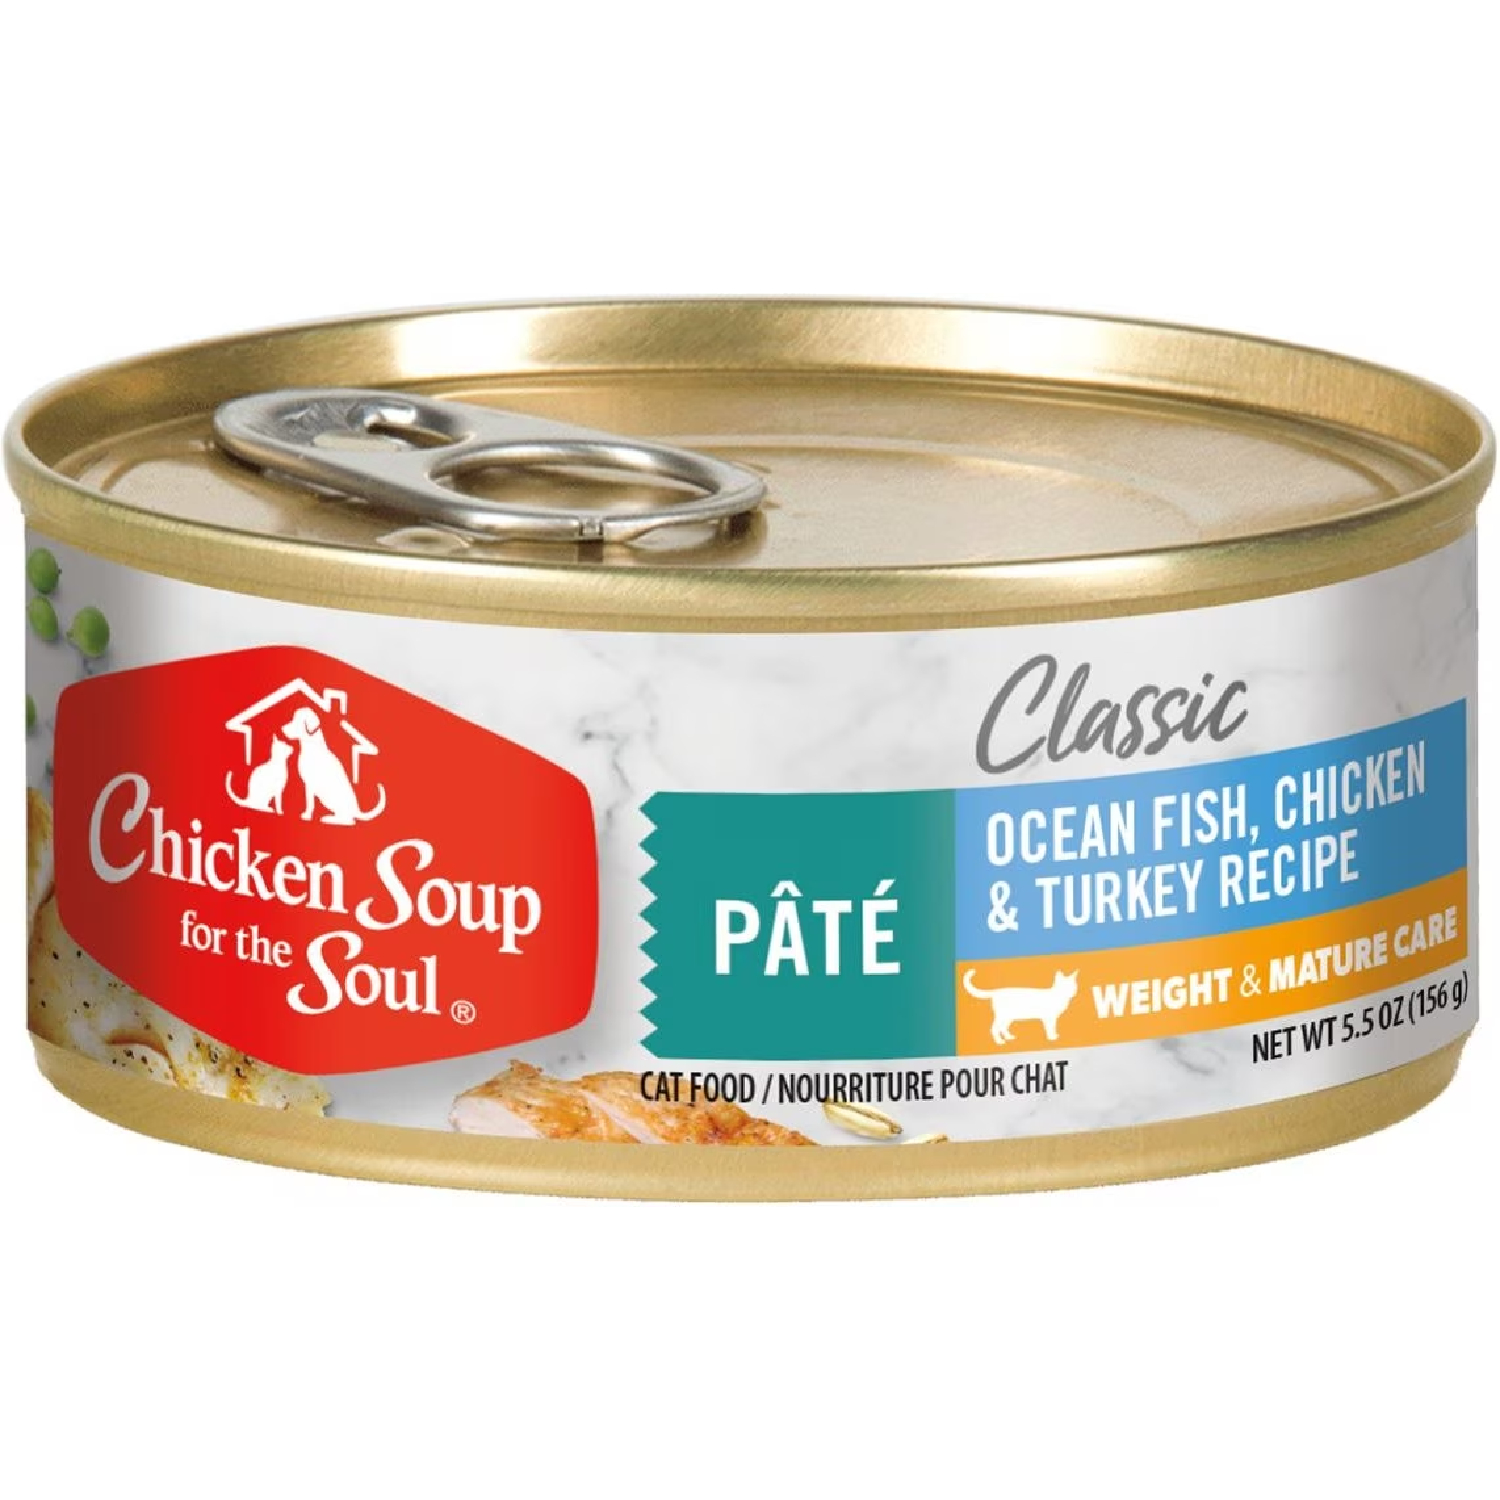 Chicken Soup for the Soul Weight & Mature Care Ocean Fish, Chicken & Turkey Recipe Pâté Canned Cat Food